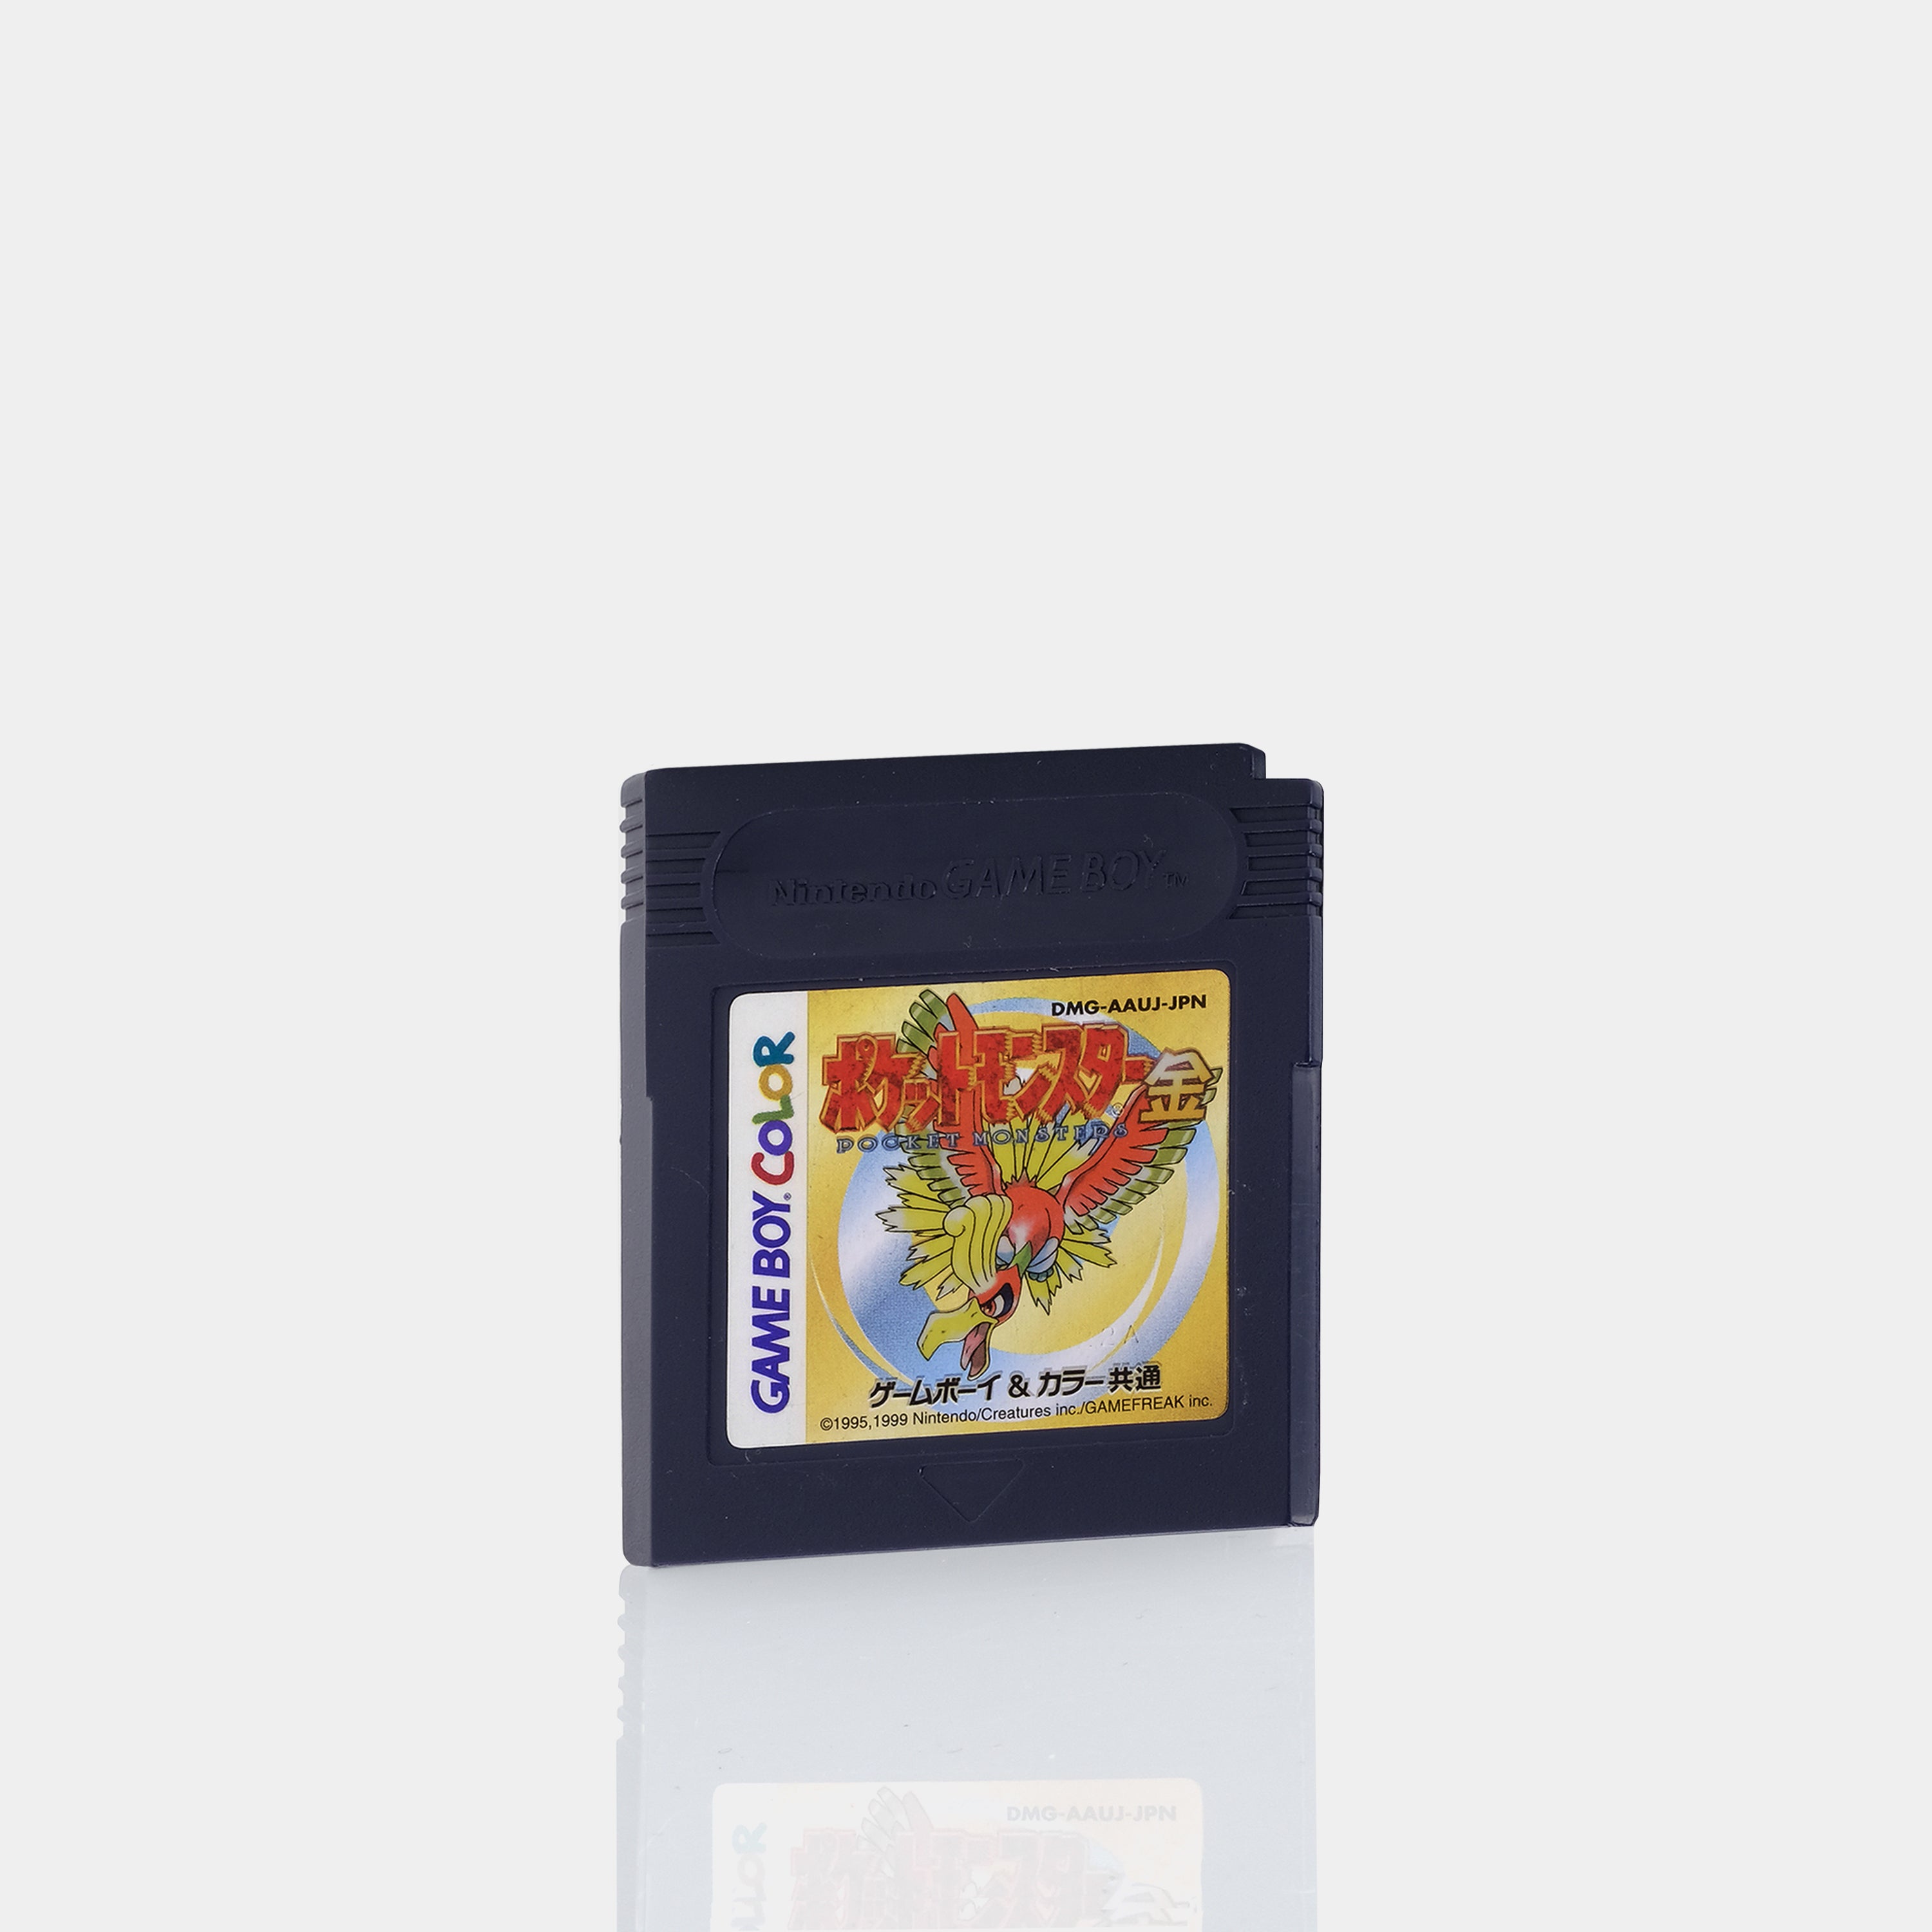 Pokemon Games Gameboy Colour Red Blue Yellow Gold 